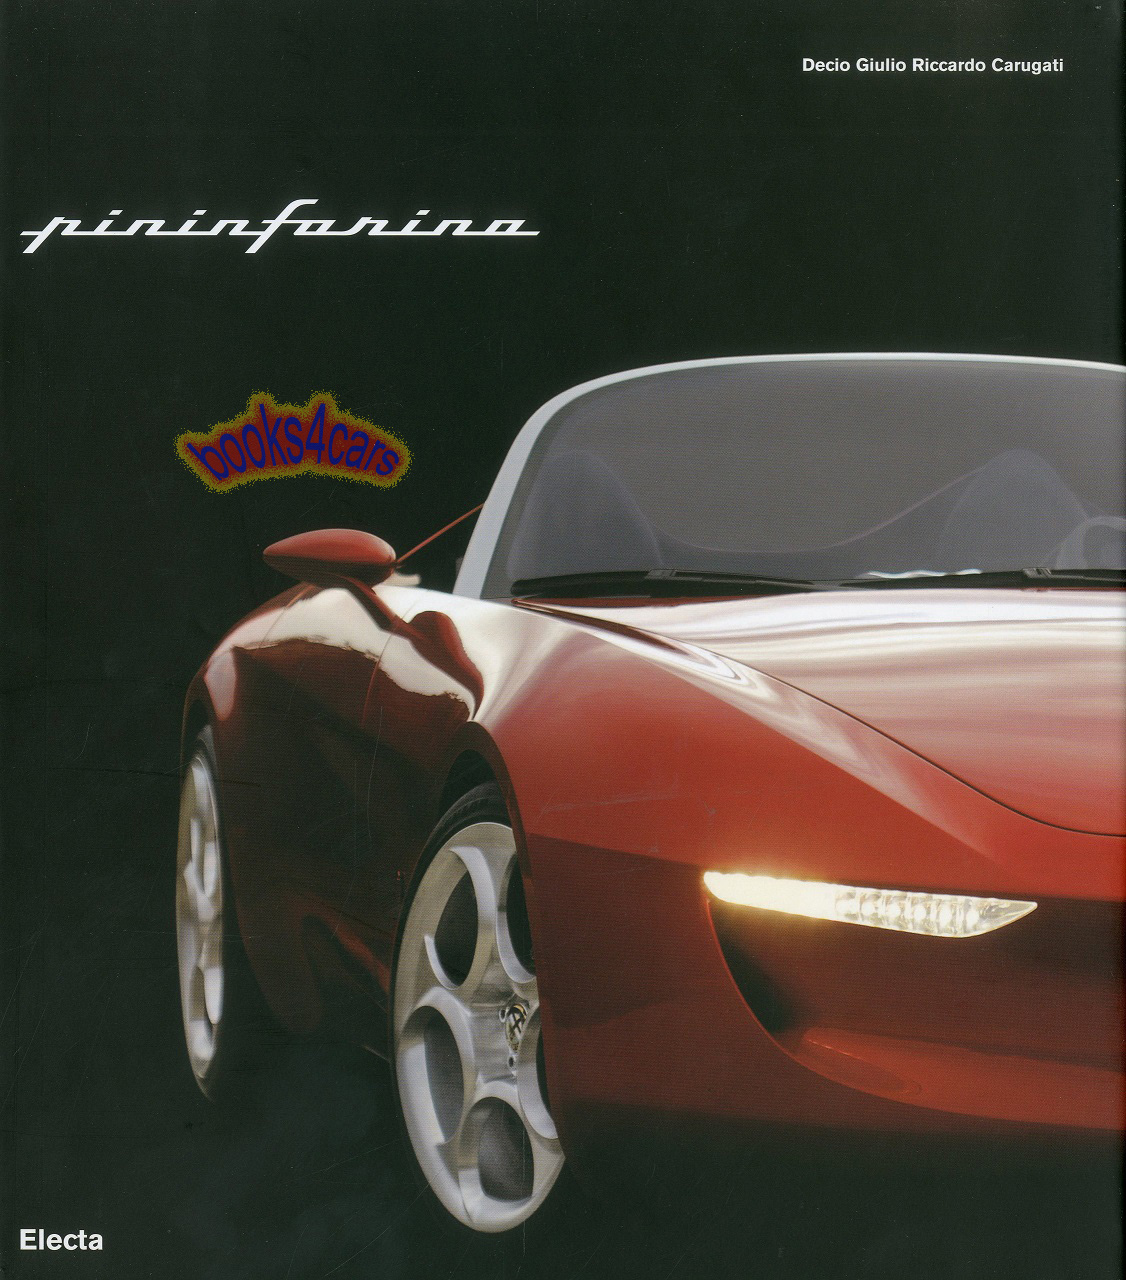 Pininfarina History by Decio Giulio R. Carugati 244 pgs with Large Hardcover published in 2010 in GERMAN language